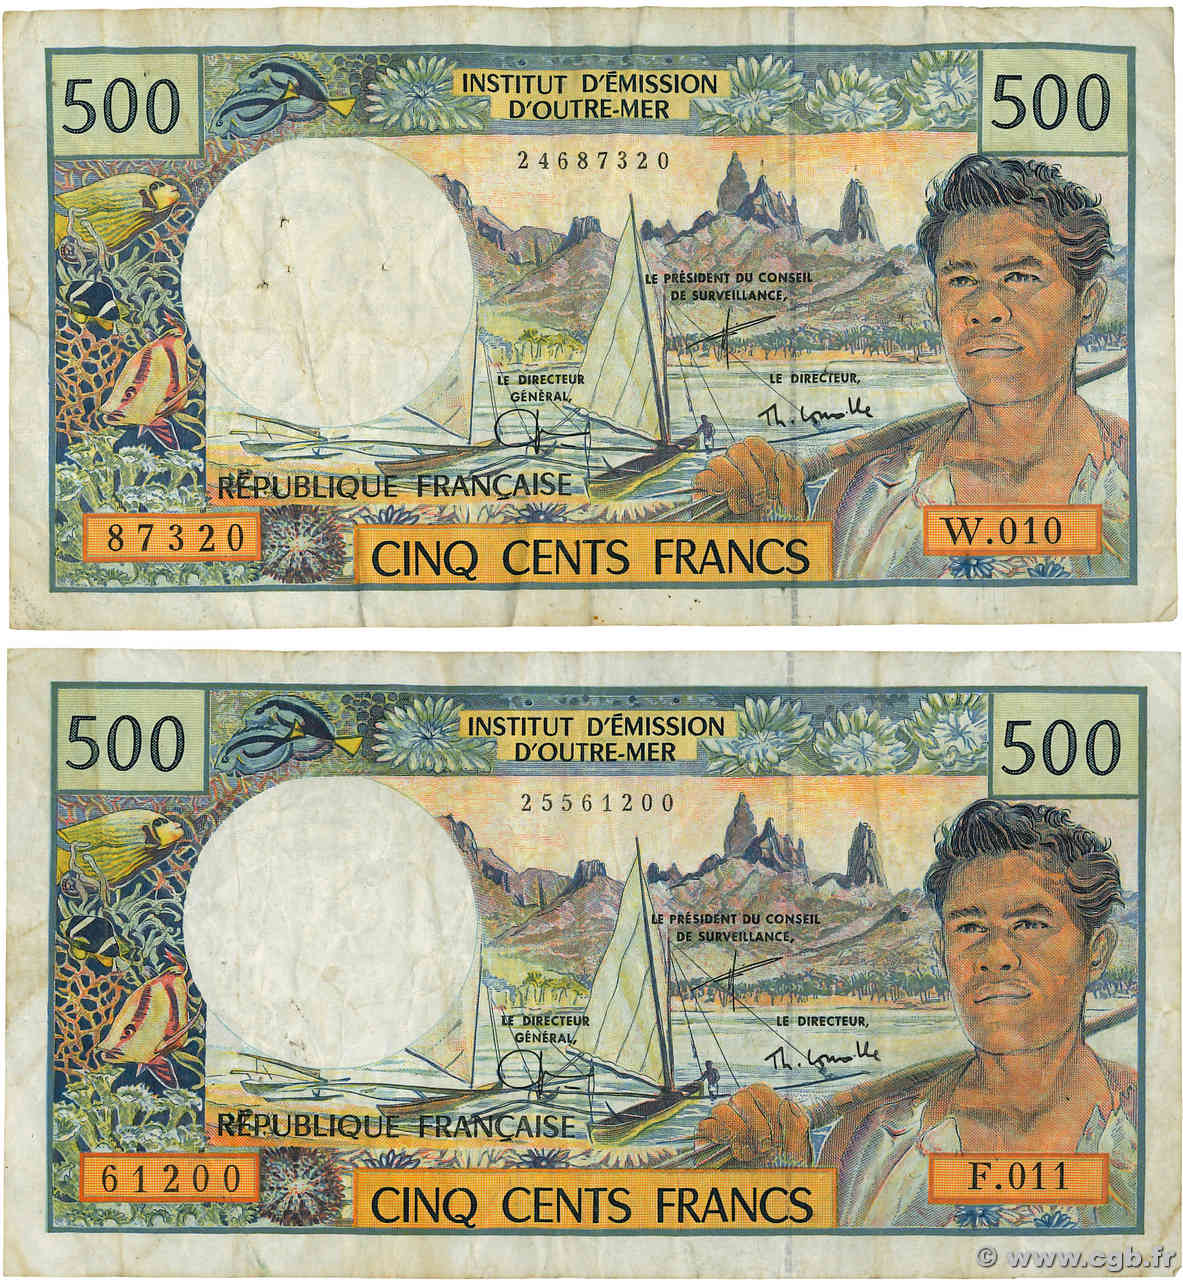 500 Francs Lot FRENCH PACIFIC TERRITORIES  1992 P.01e F